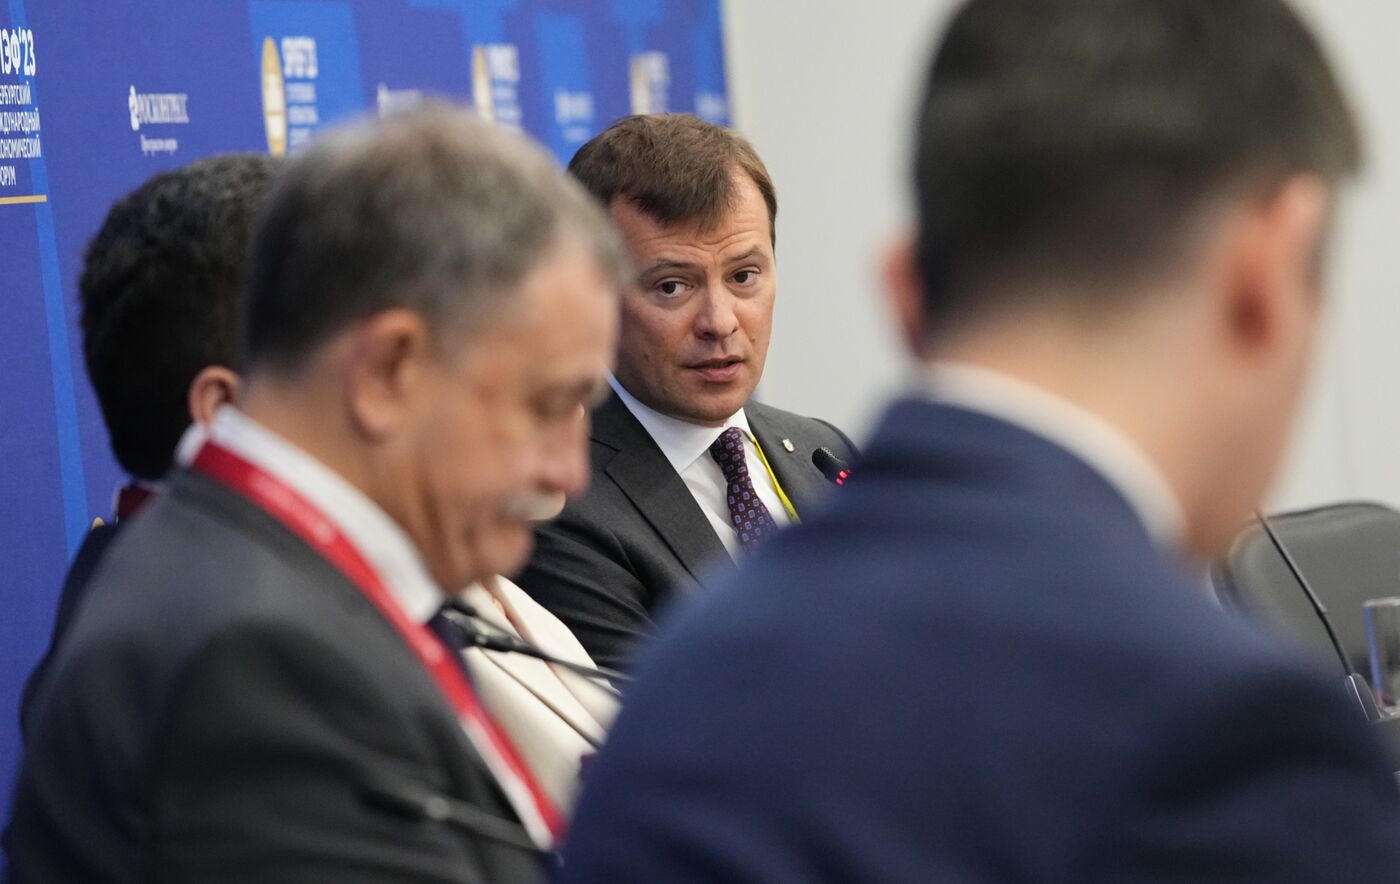 SPIEF-2023. A Digital Area of Growth: How Labelling is Changing the Business Climate